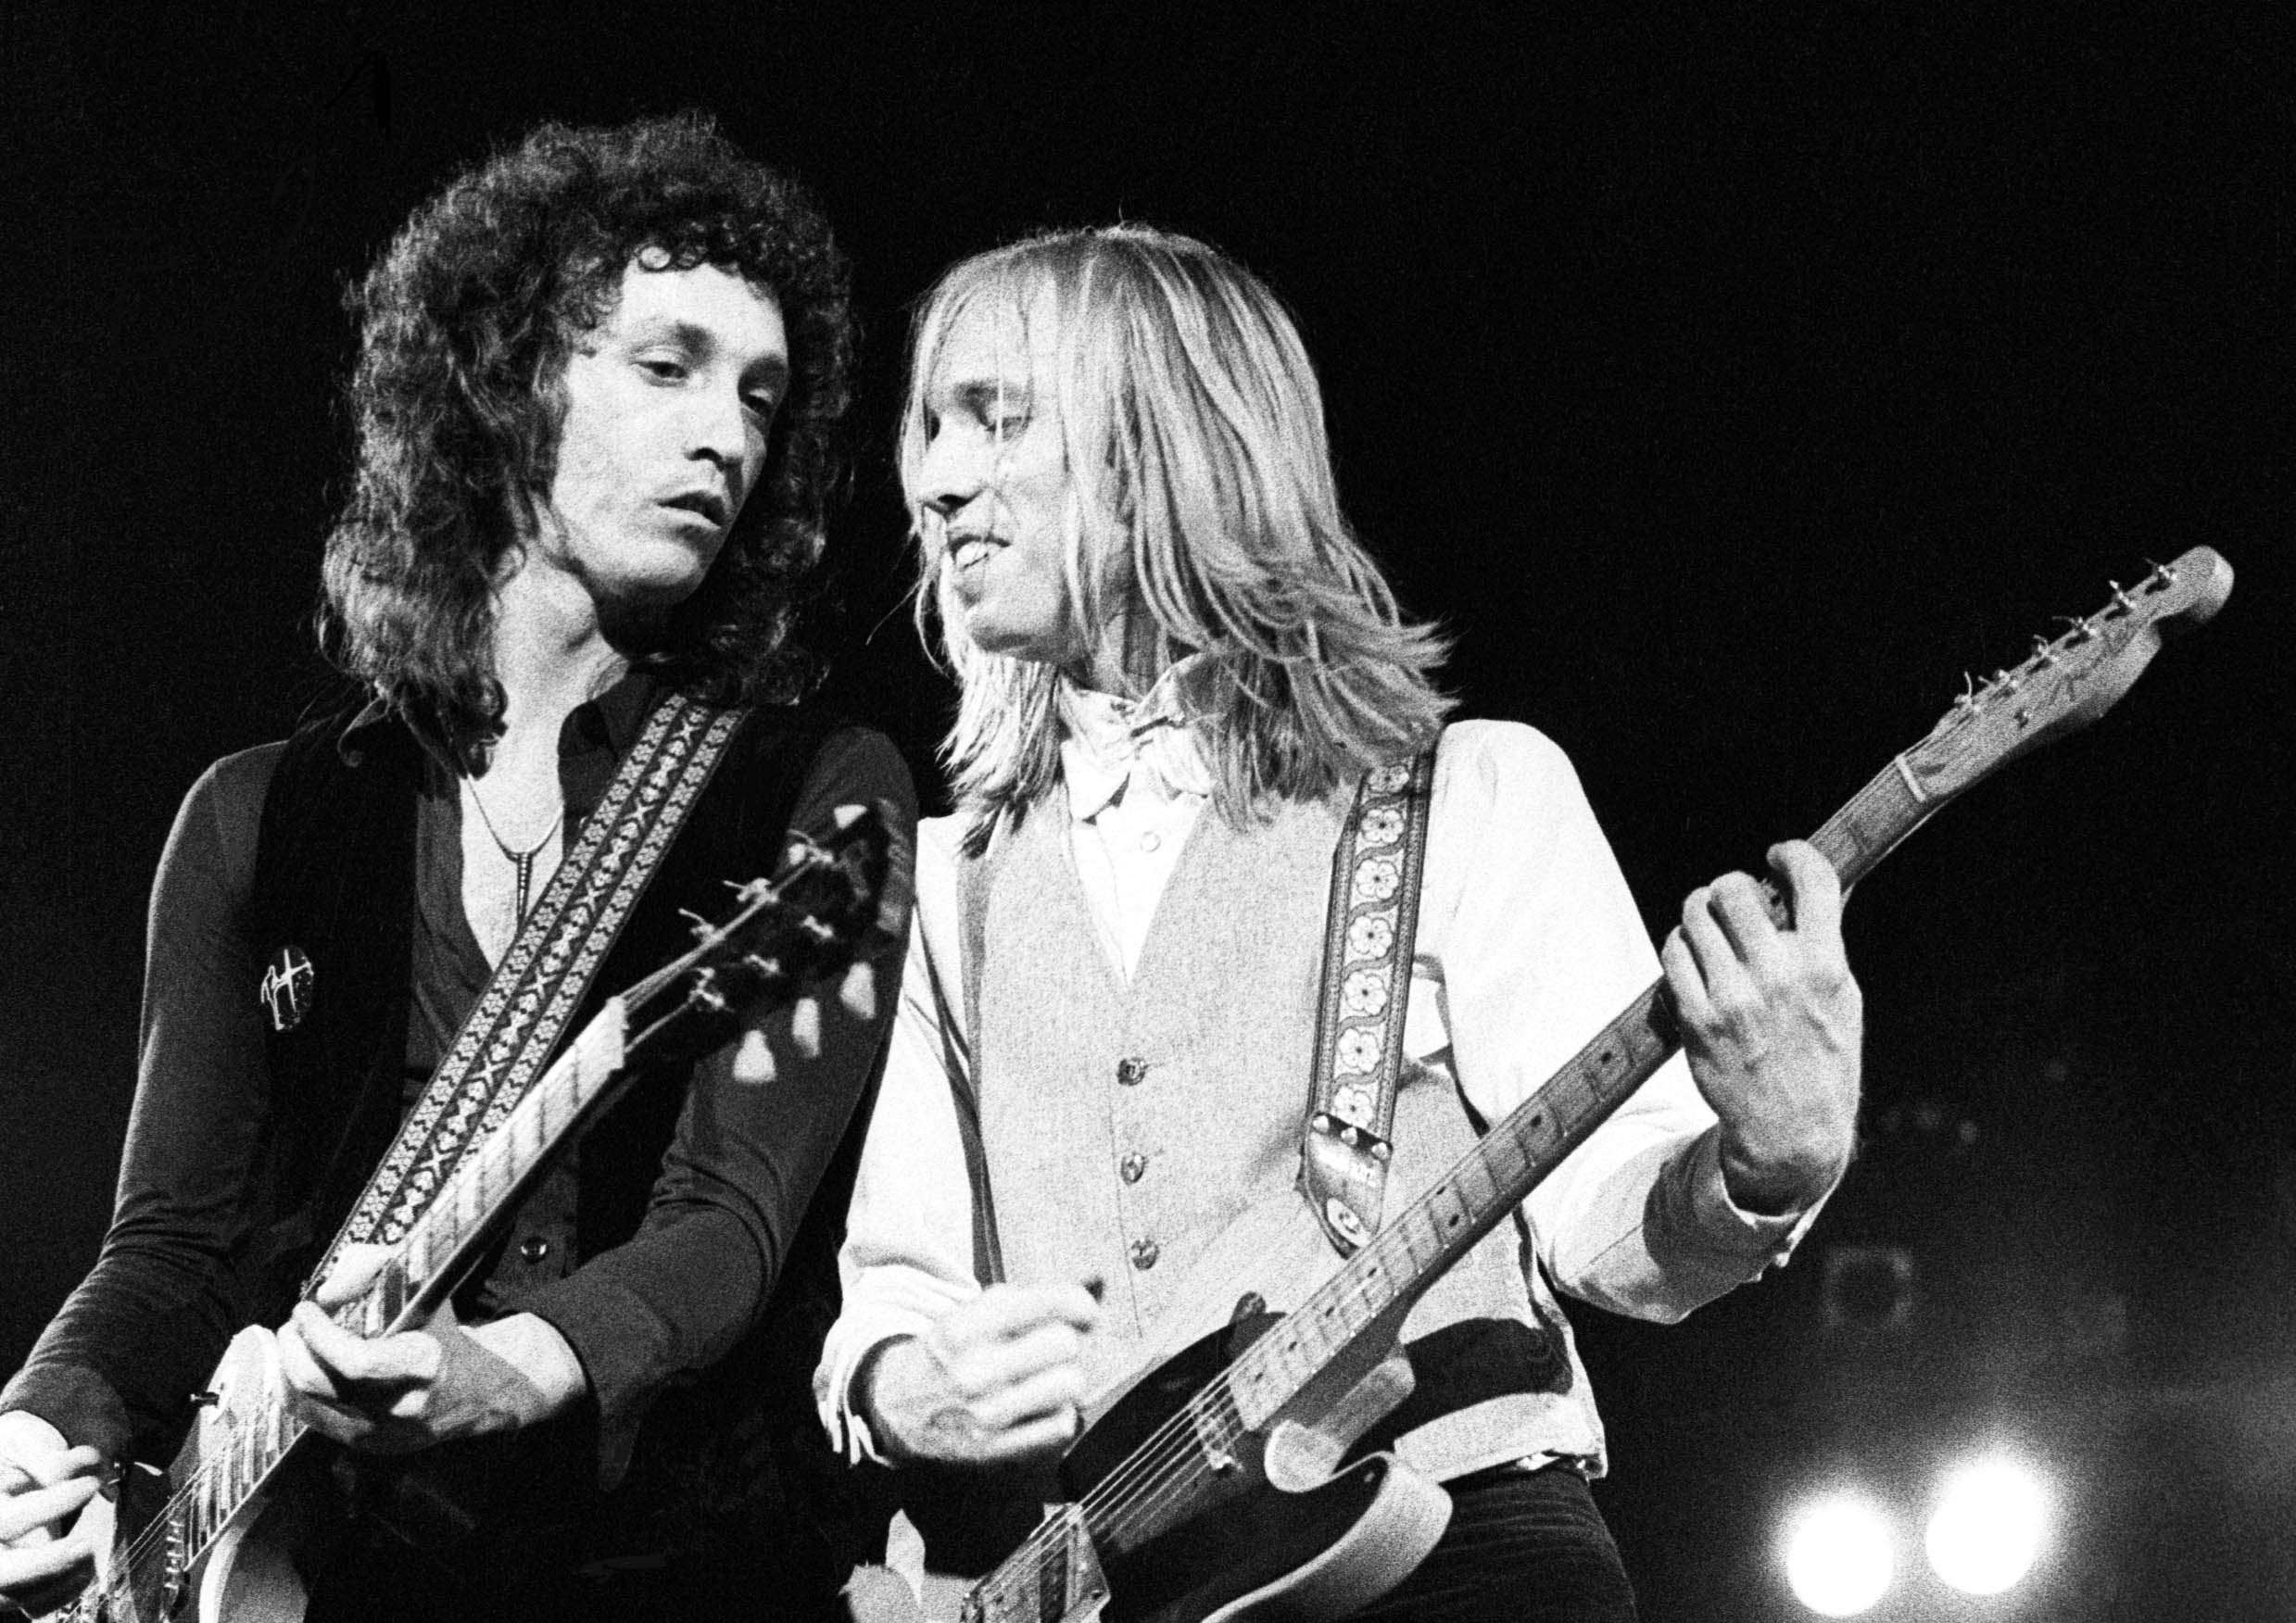 A black and white picture of bandmates Mike Campbell and Tom Petty playing guitar together.